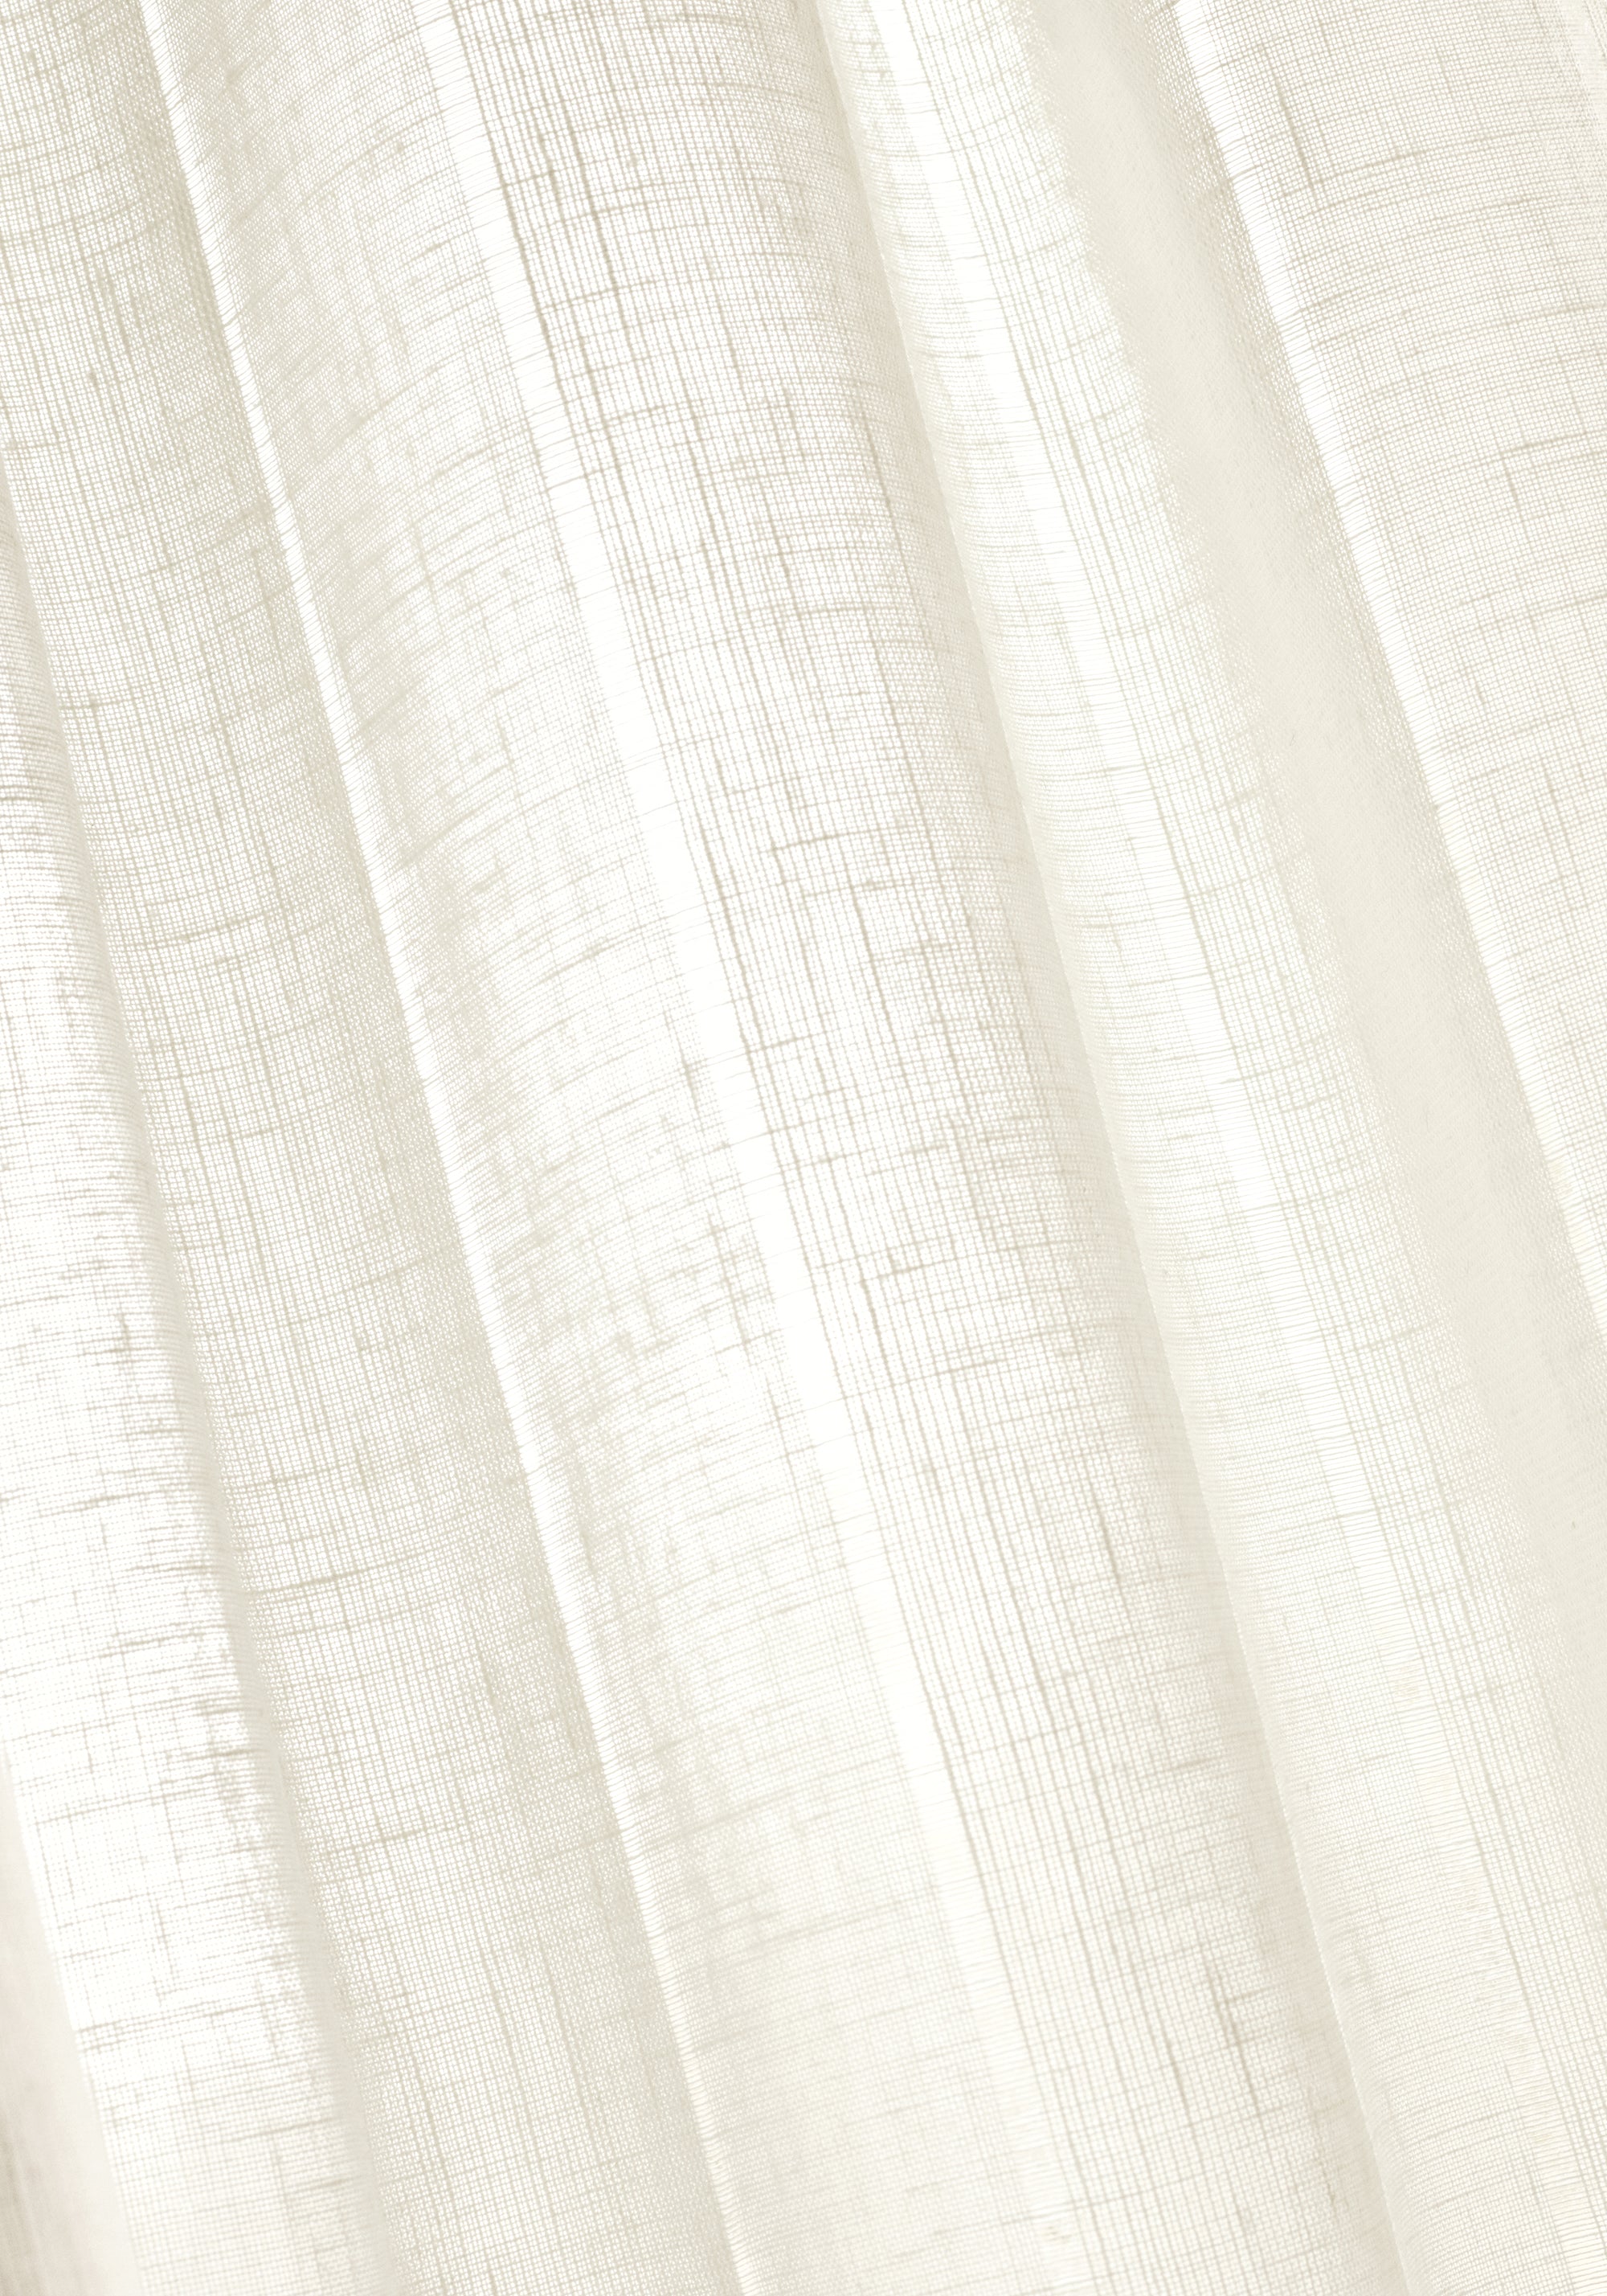 Up close sheer in Erba Stripe fabric in ivory color - pattern number FWW8242 - by Thibaut in the Aura collection